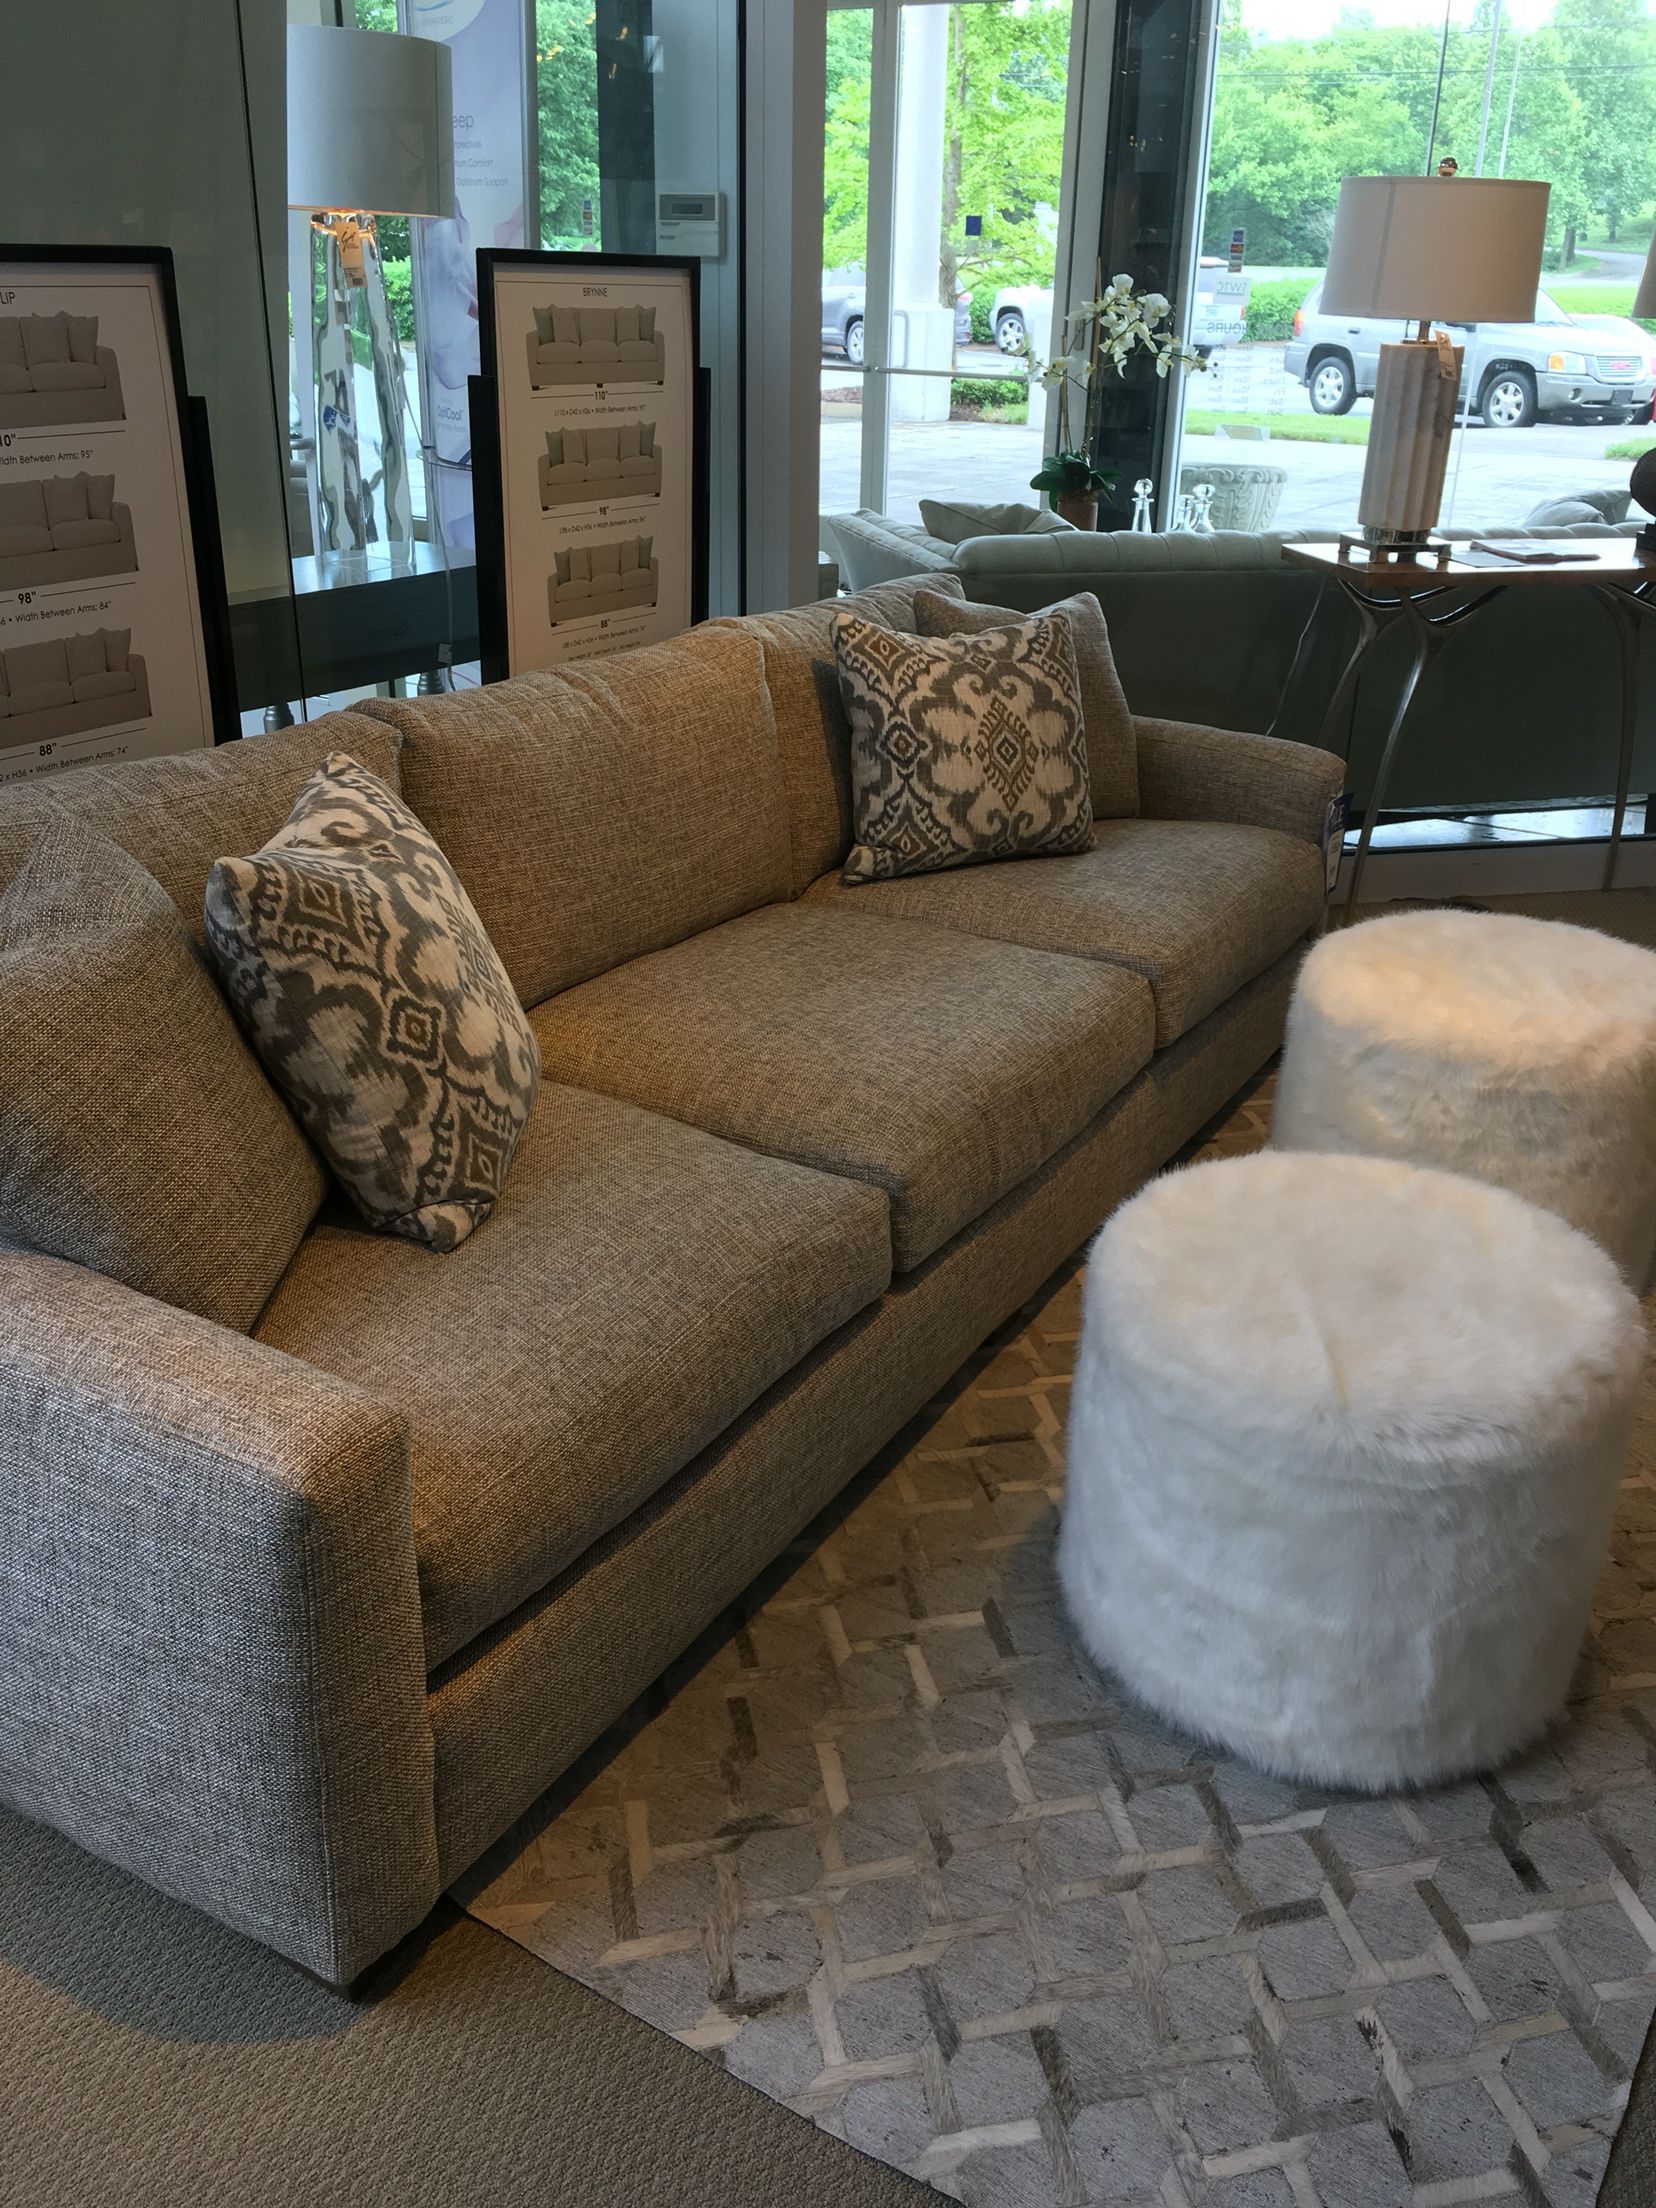 Large Overstuffed Sofa | Living Room, Sofa, Room Throughout 110" Oversized Sofas (View 7 of 15)